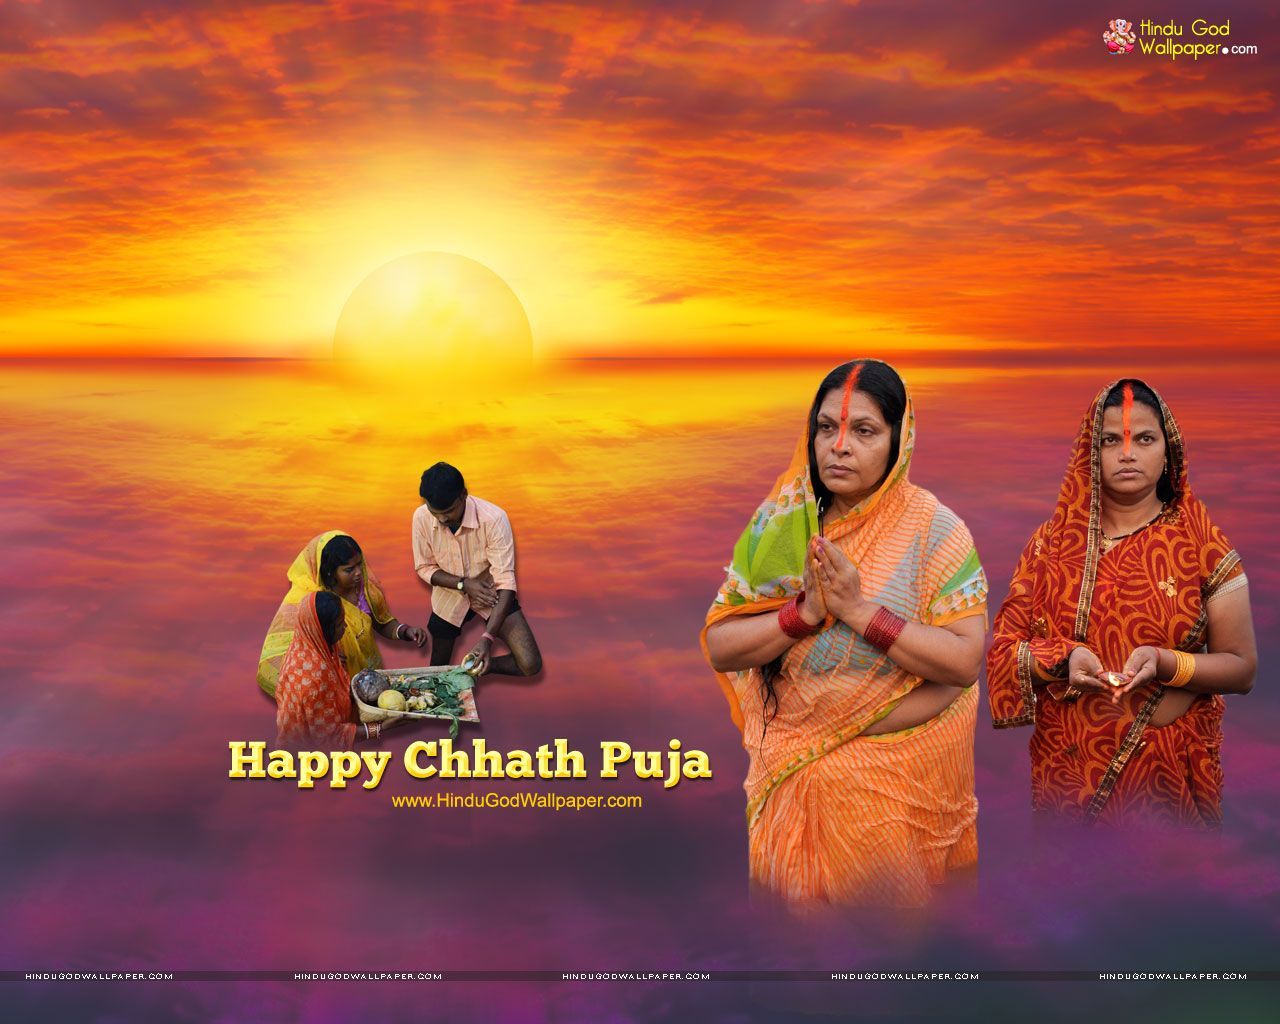 2996 Chhath Puja Image Images Stock Photos  Vectors  Shutterstock